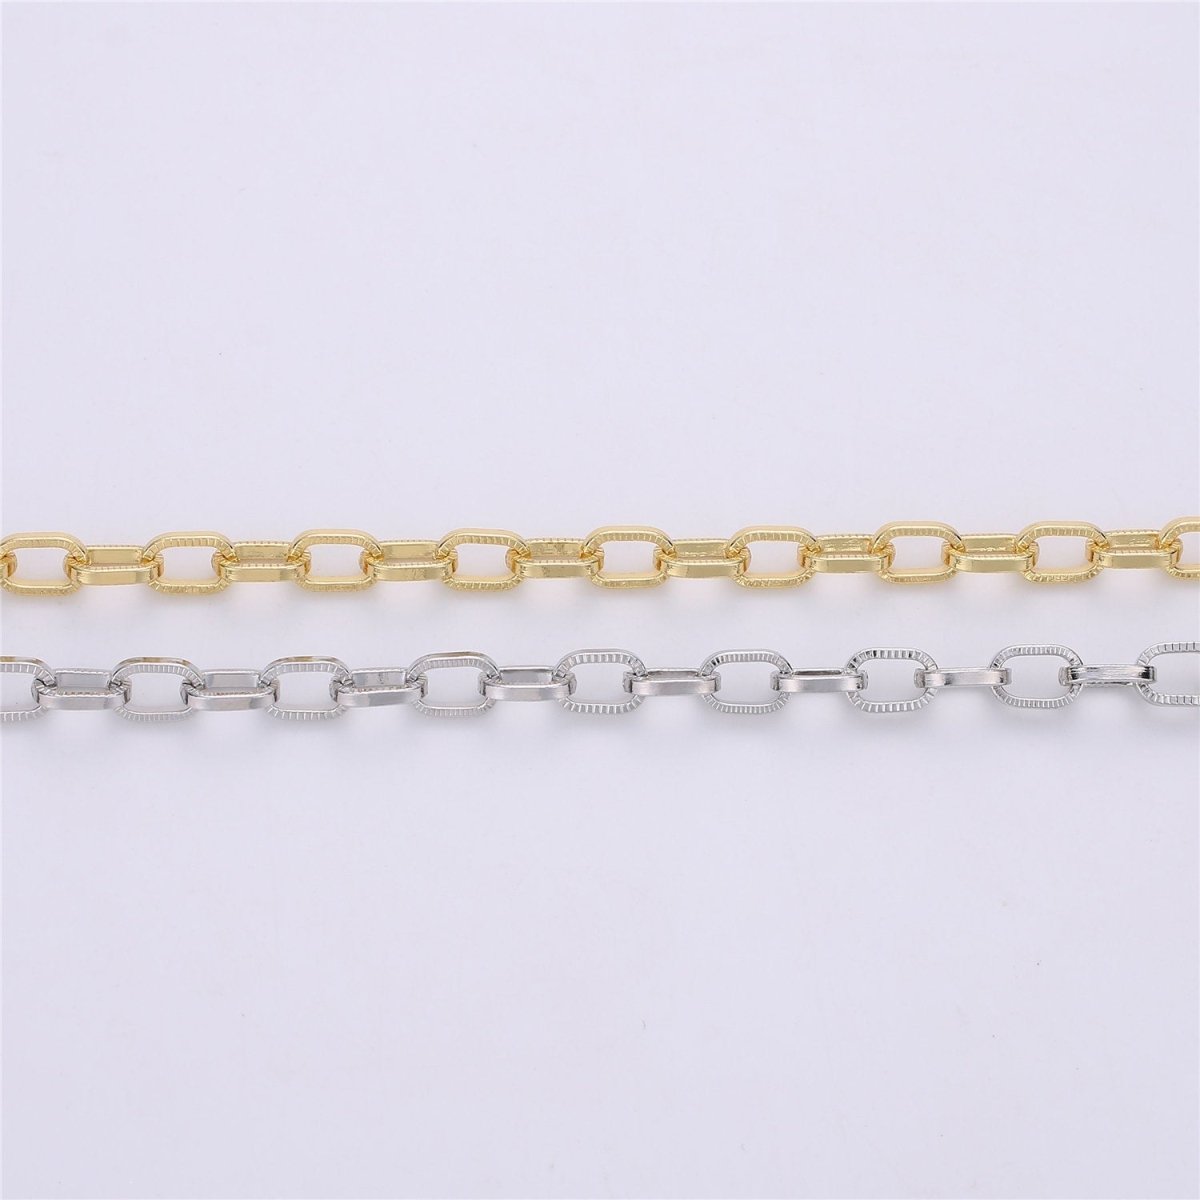 24K Gold Filled Paper Clip Chain, Unfinished Chain by Yard, Rectangle Drawn for Bracelet, Necklace Jewelry Making Supply 6x10mm | ROLL-092, ROLL-093 Clearance Pricing - DLUXCA